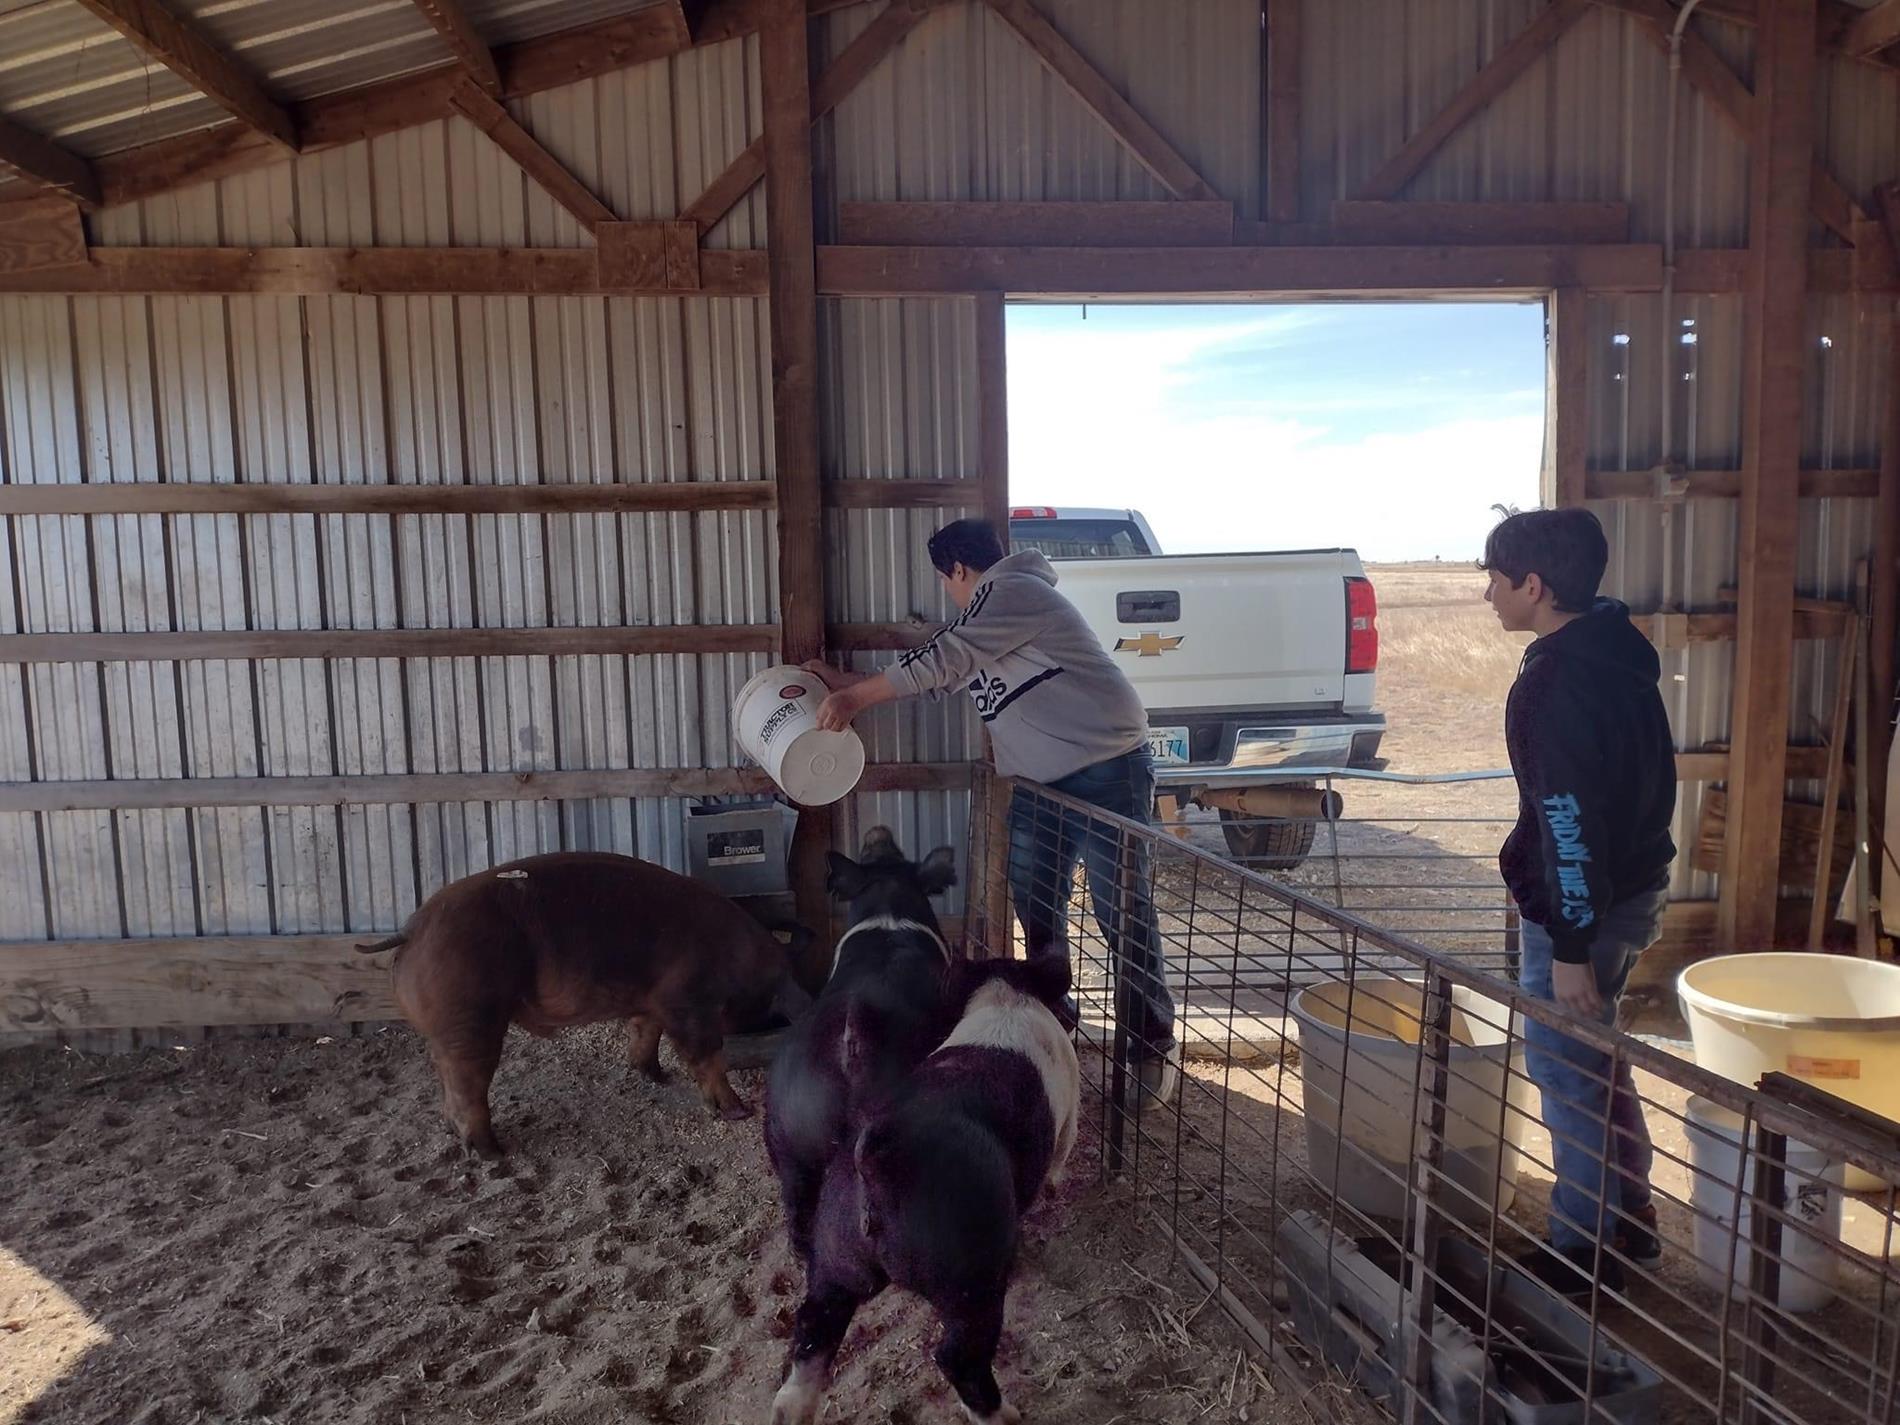 Students during an ag class working with livestock